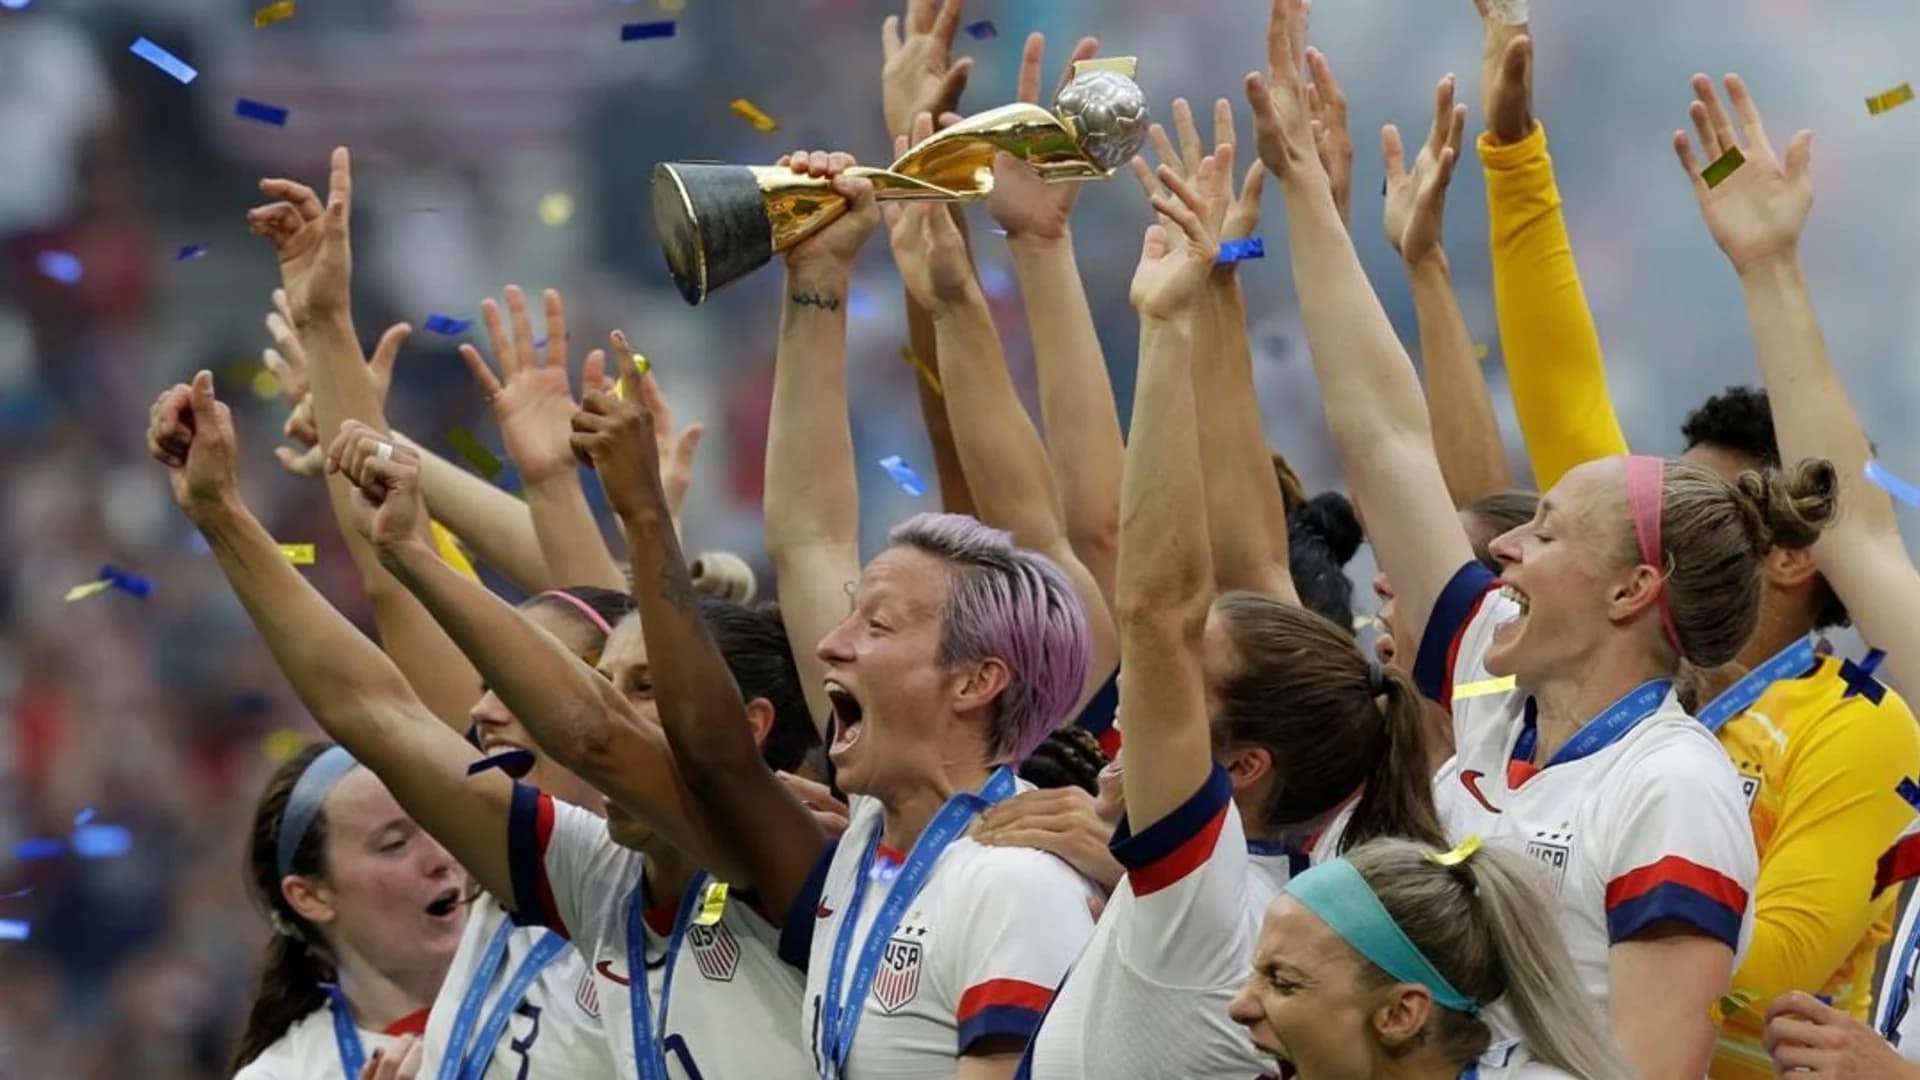 Mayor: NYC throwing ticker-tape parade to celebrate Women's World Cup win